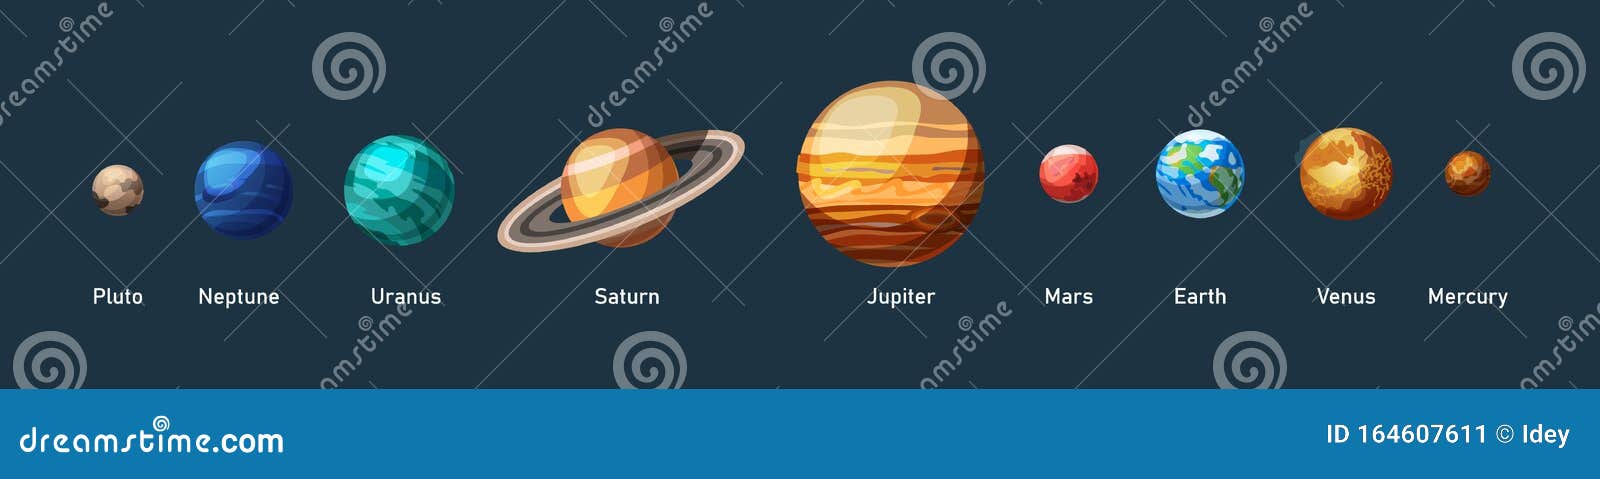 our galaxy with planets earth, jupiter, saturn, pluto, venus, mercury